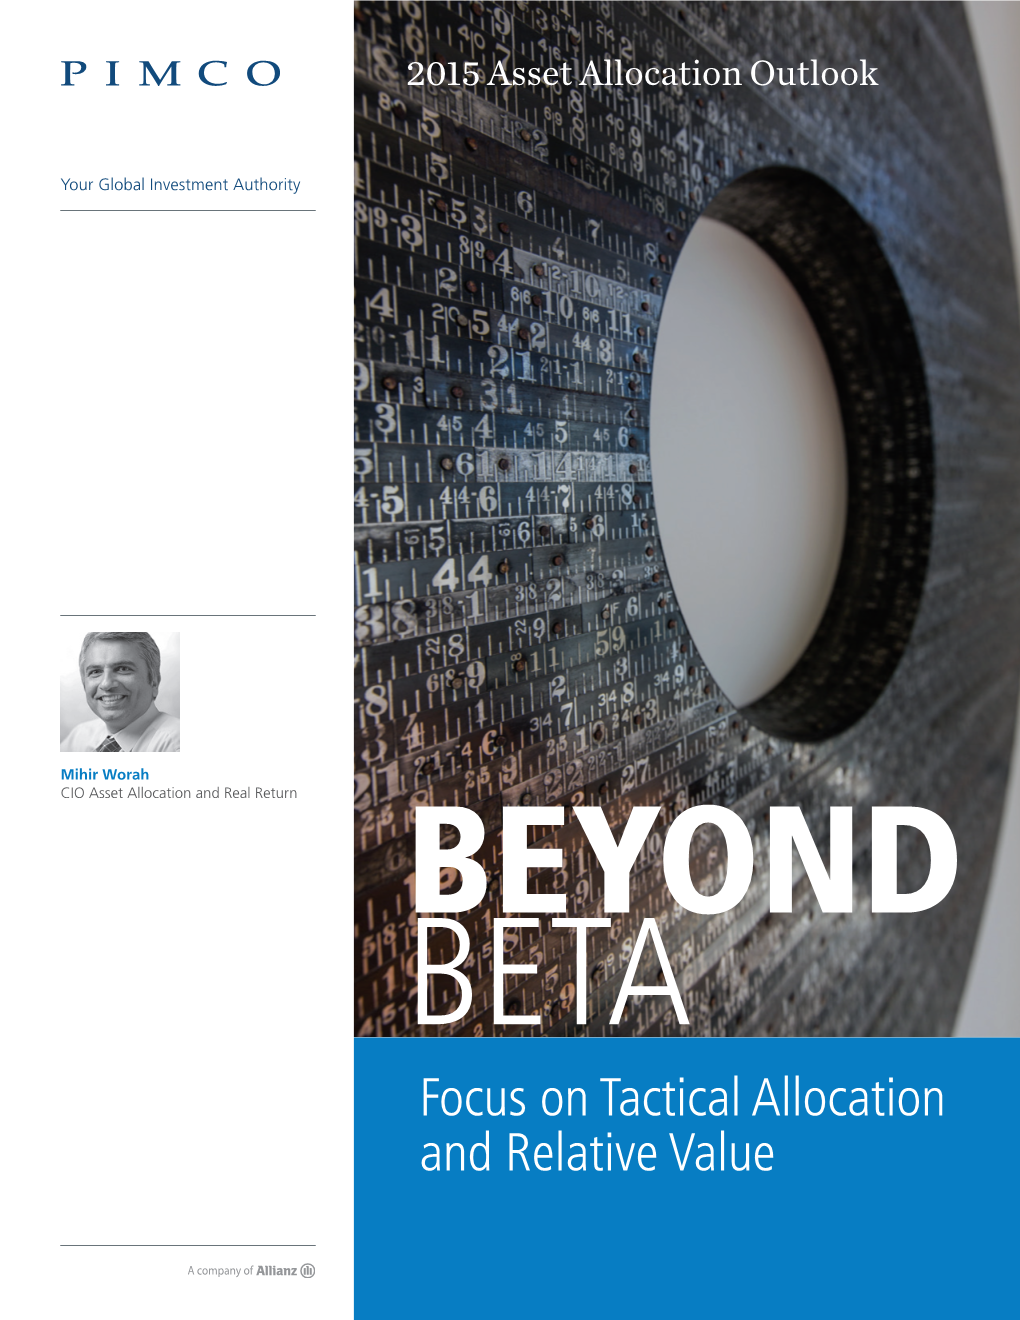 Focus on Tactical Allocation and Relative Value